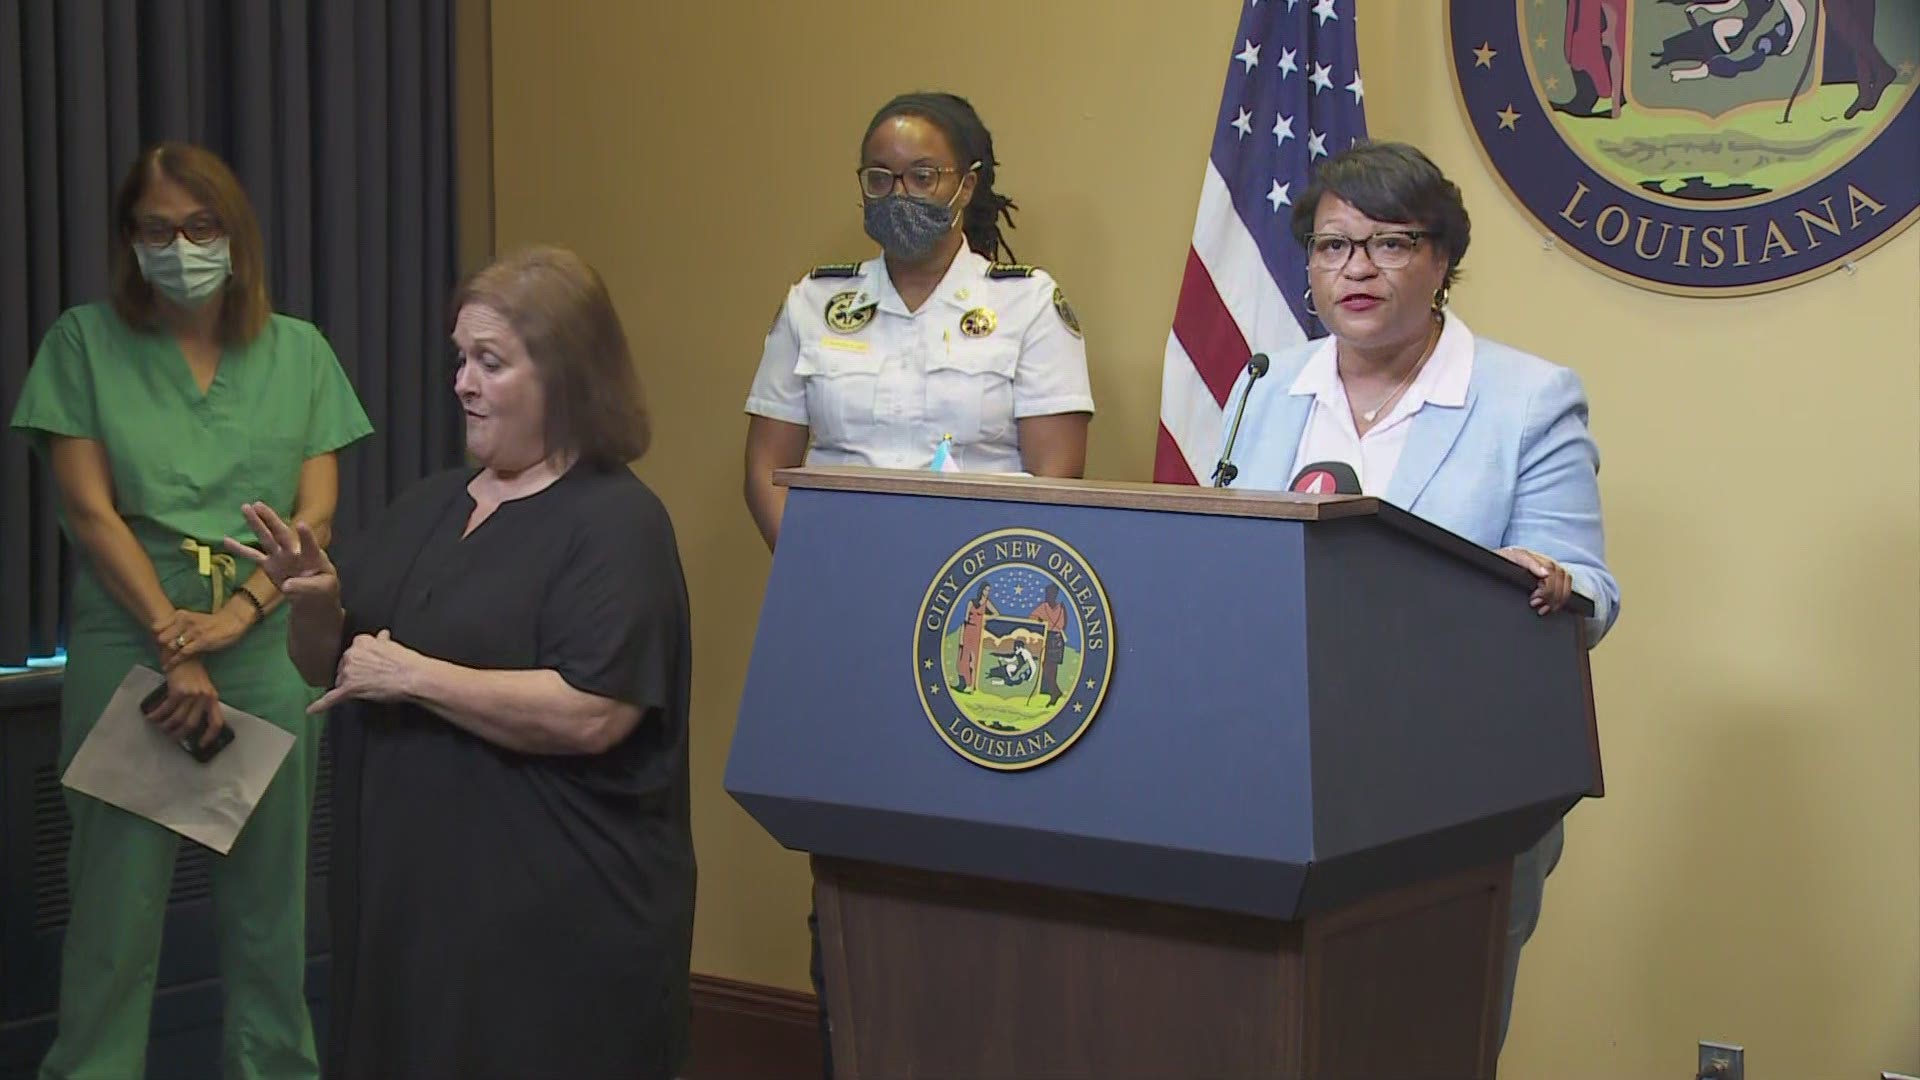 The city of New Orleans is strongly advising people to wear masks when indoors and around people not a part of their immediate family.